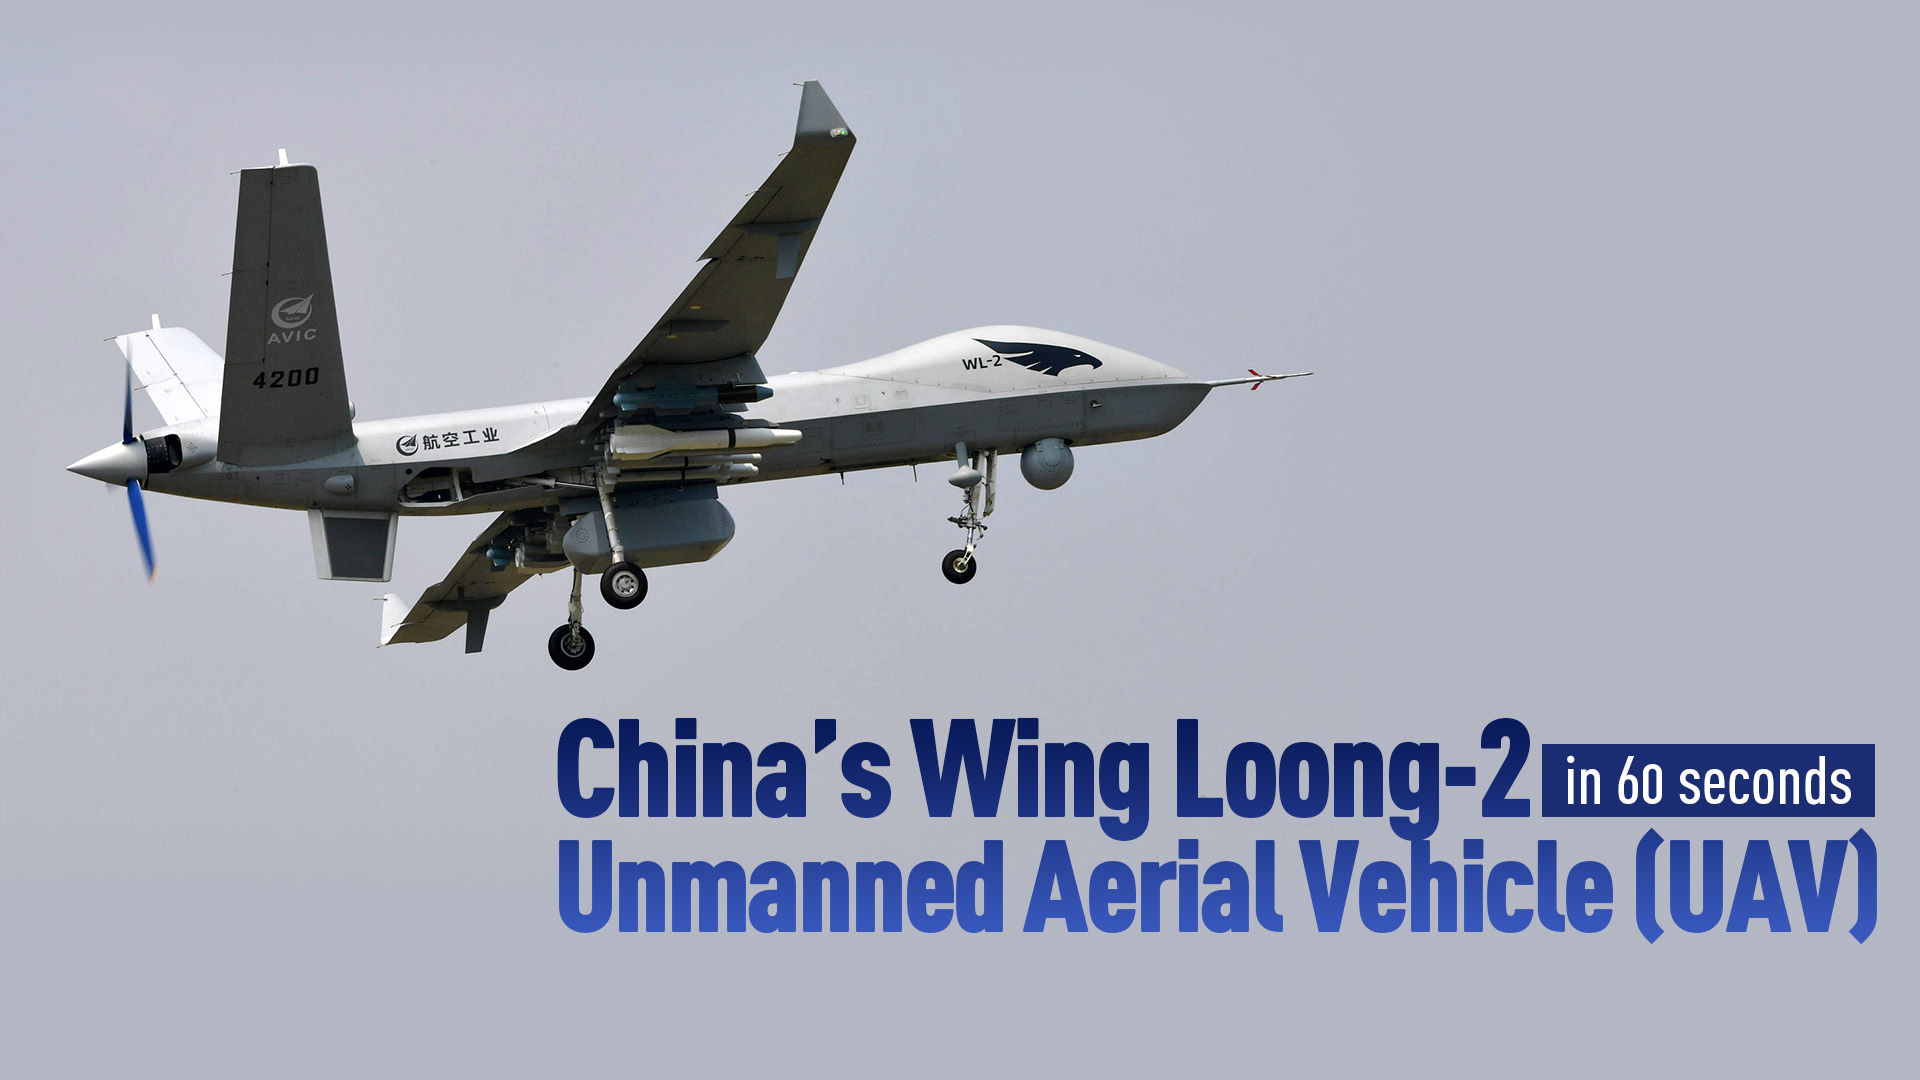 Chinas Wing Loong 2 Unmanned Aerial Vehicle Uav In 60 Seconds Cgtn